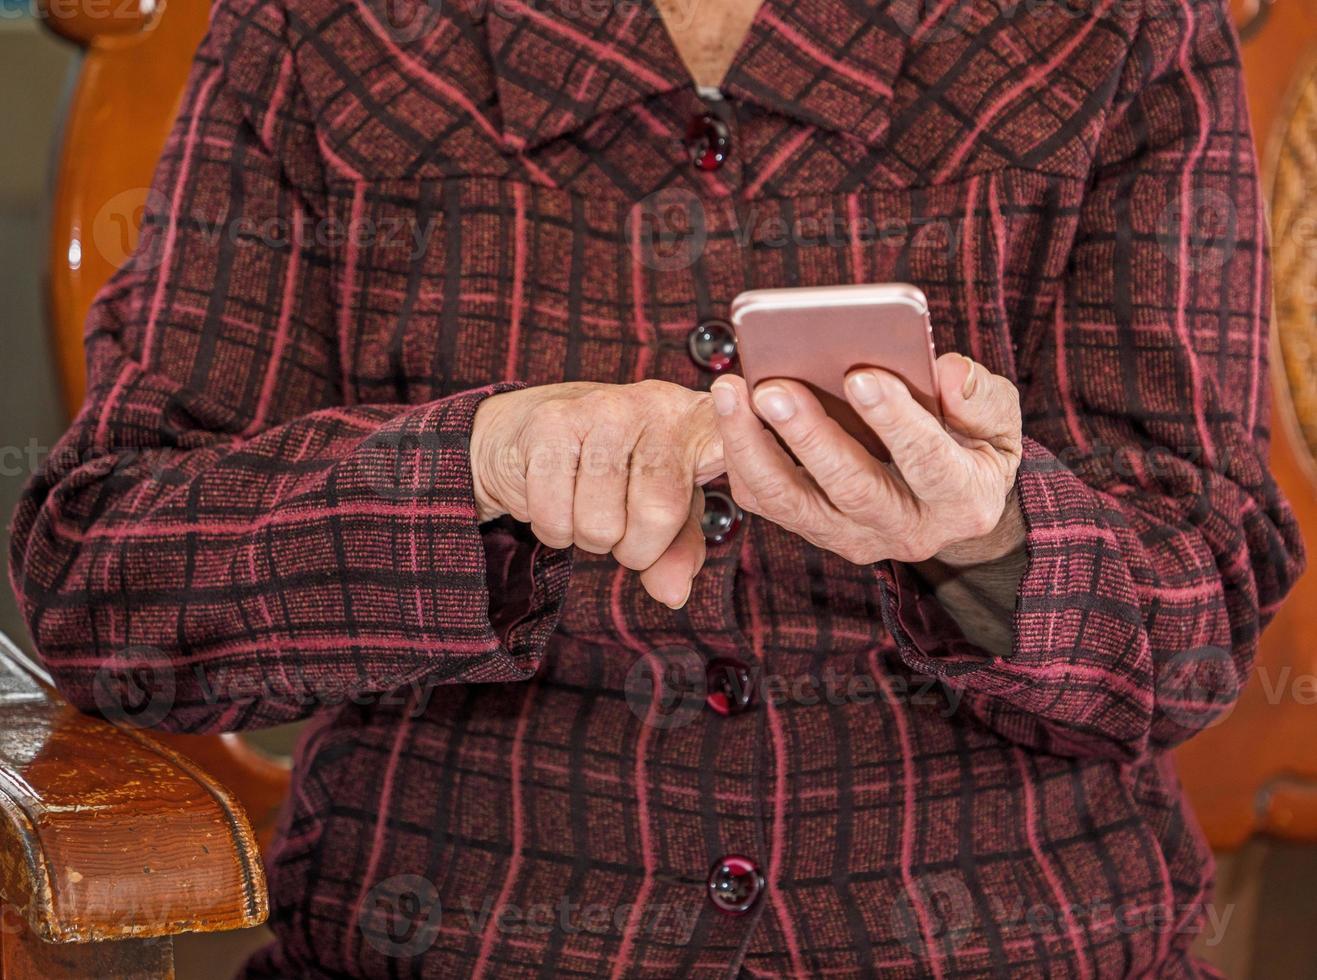 Asian elderly woman sitting and looking through something on modern smartphone, making connection with others at home, living technology, close up photo